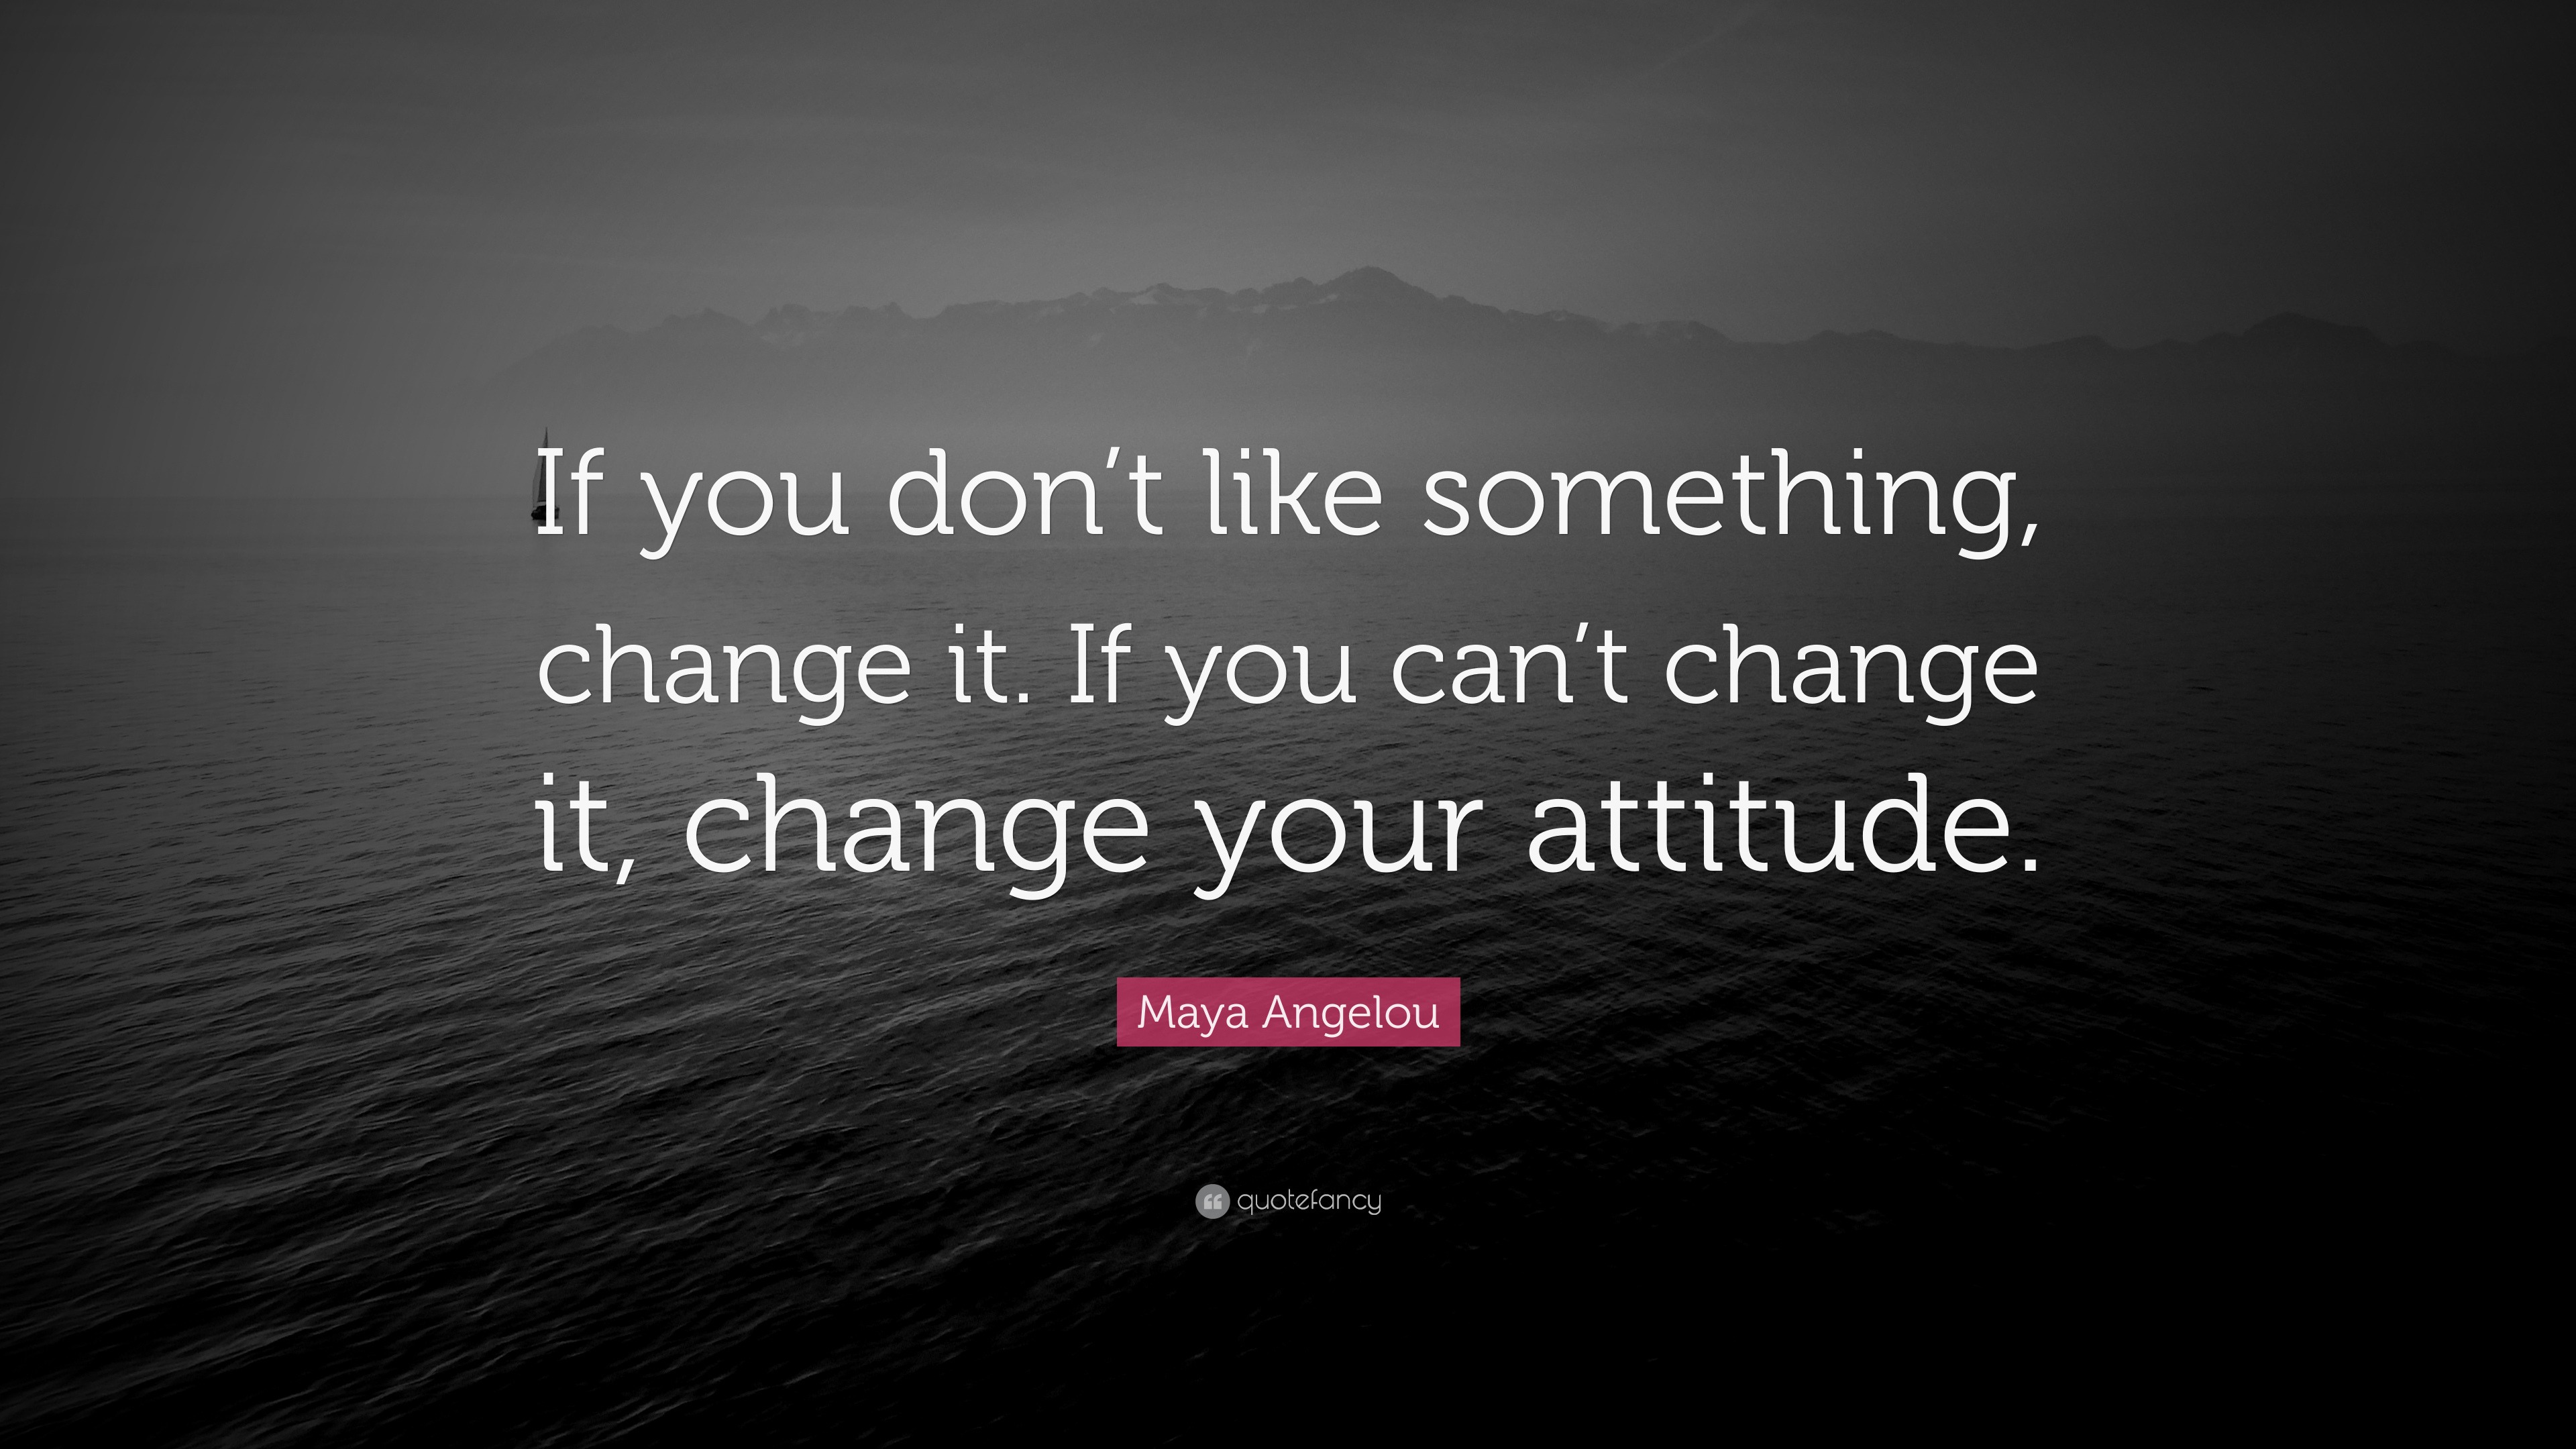 Maya Angelou Quote: “If you don’t like something, change it. If you can ...